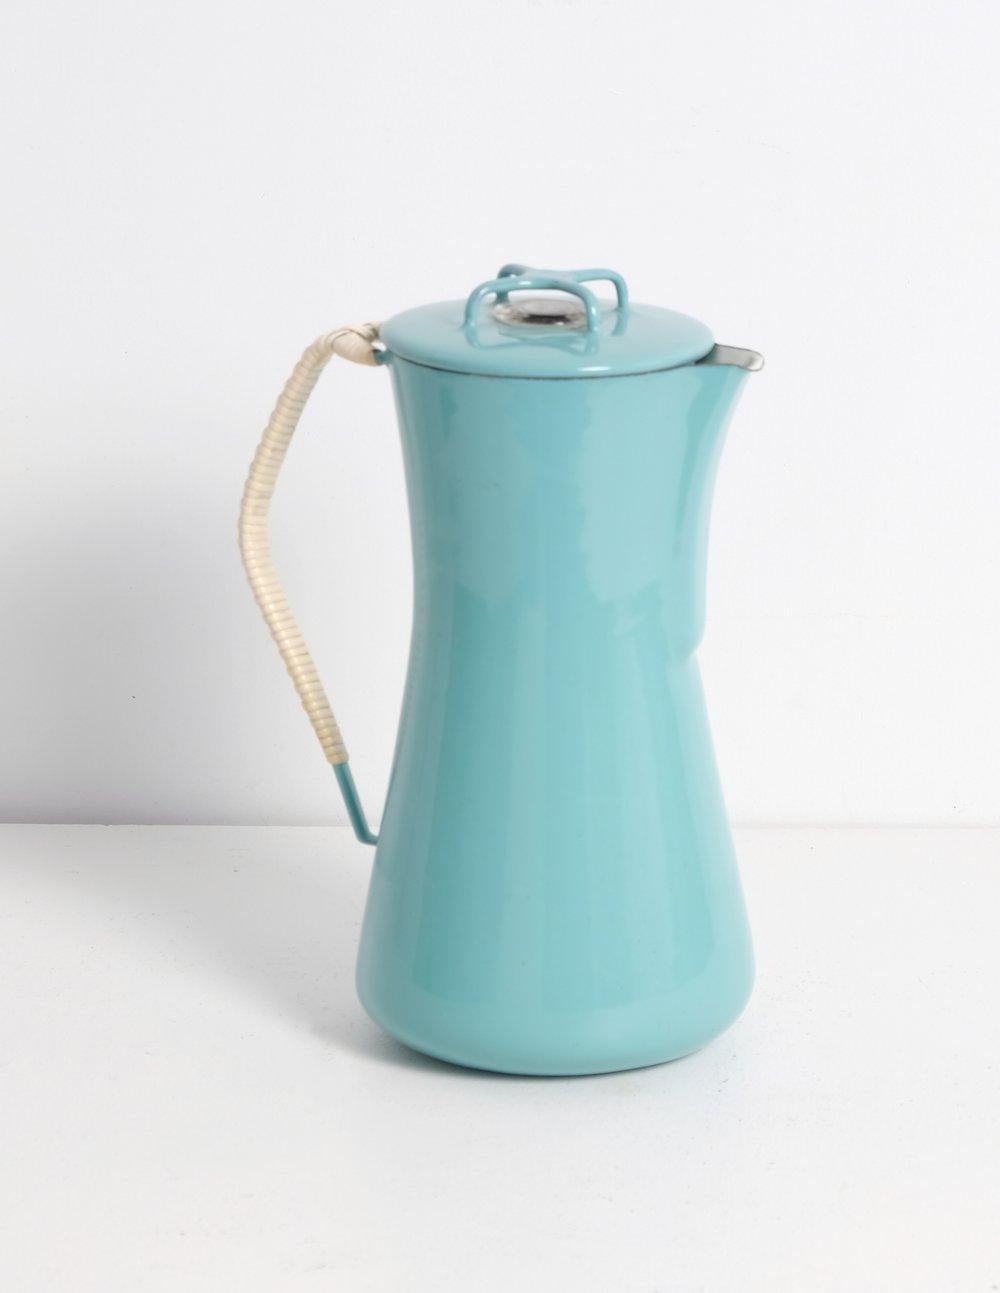 Mid-20th Century Dansk Kobenstyle Ihq Turquoise/Teal Percolator by Jens Quistgaard